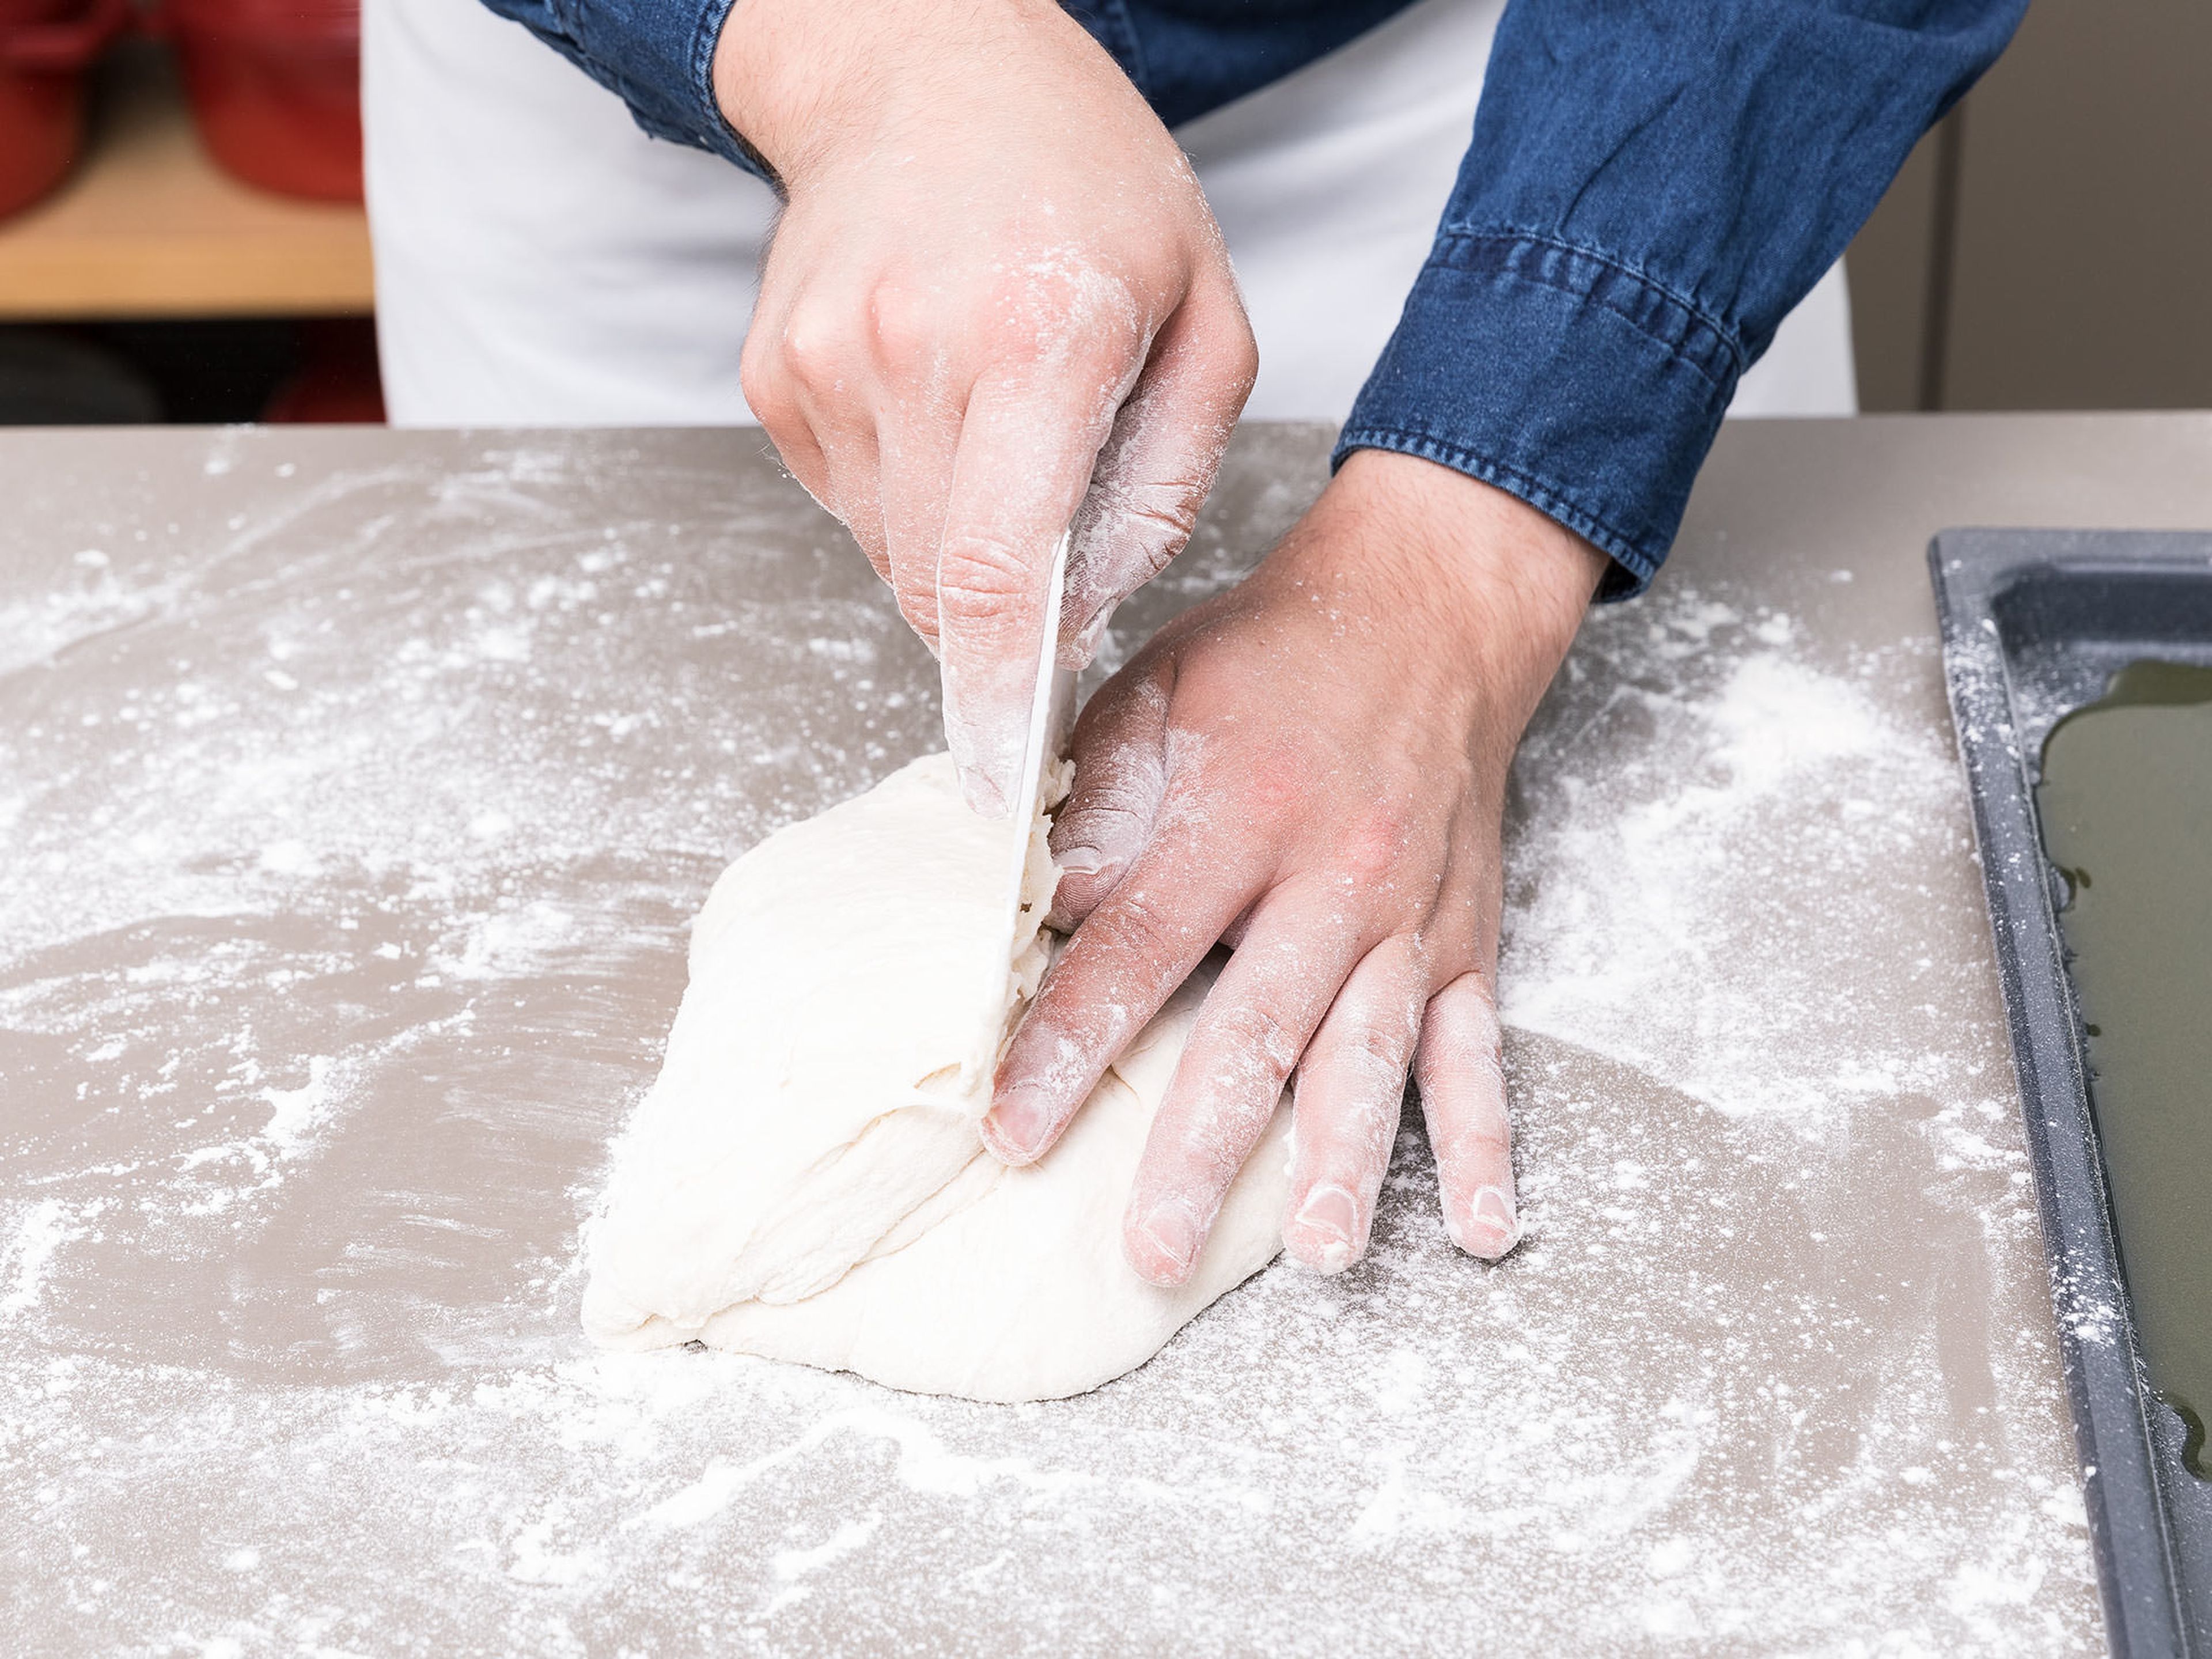 Preheat the oven to 230°C/450°F and put an empty baking sheet in the bottom position. Transfer dough to a floured work surface and sprinkle with more flour. Cut the dough in half and fold each piece into thirds, then half, patting and shaping into a loaf as you go.